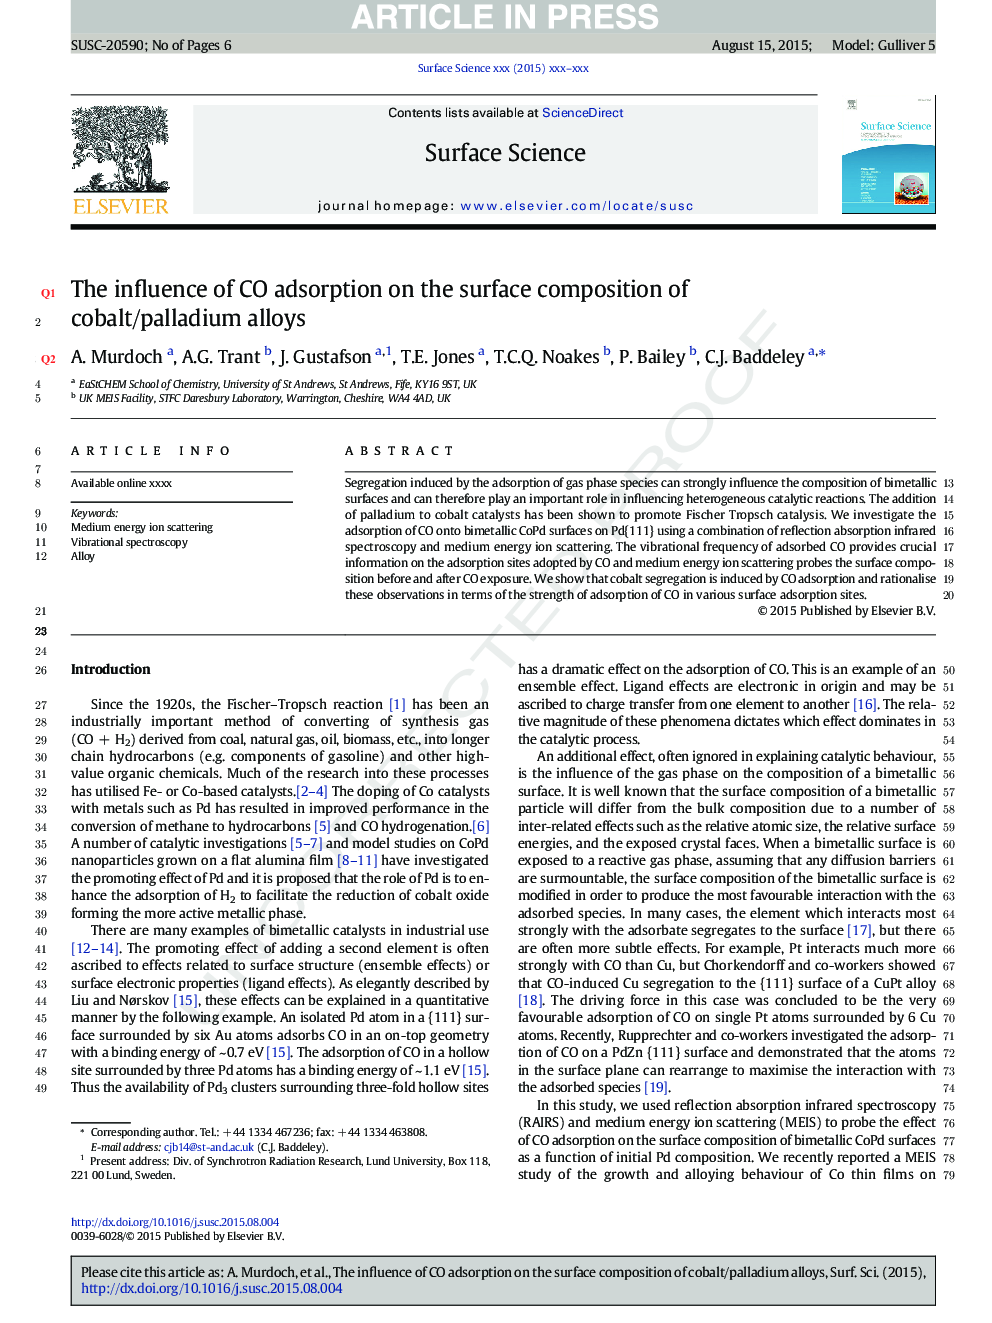 The influence of CO adsorption on the surface composition of cobalt/palladium alloys